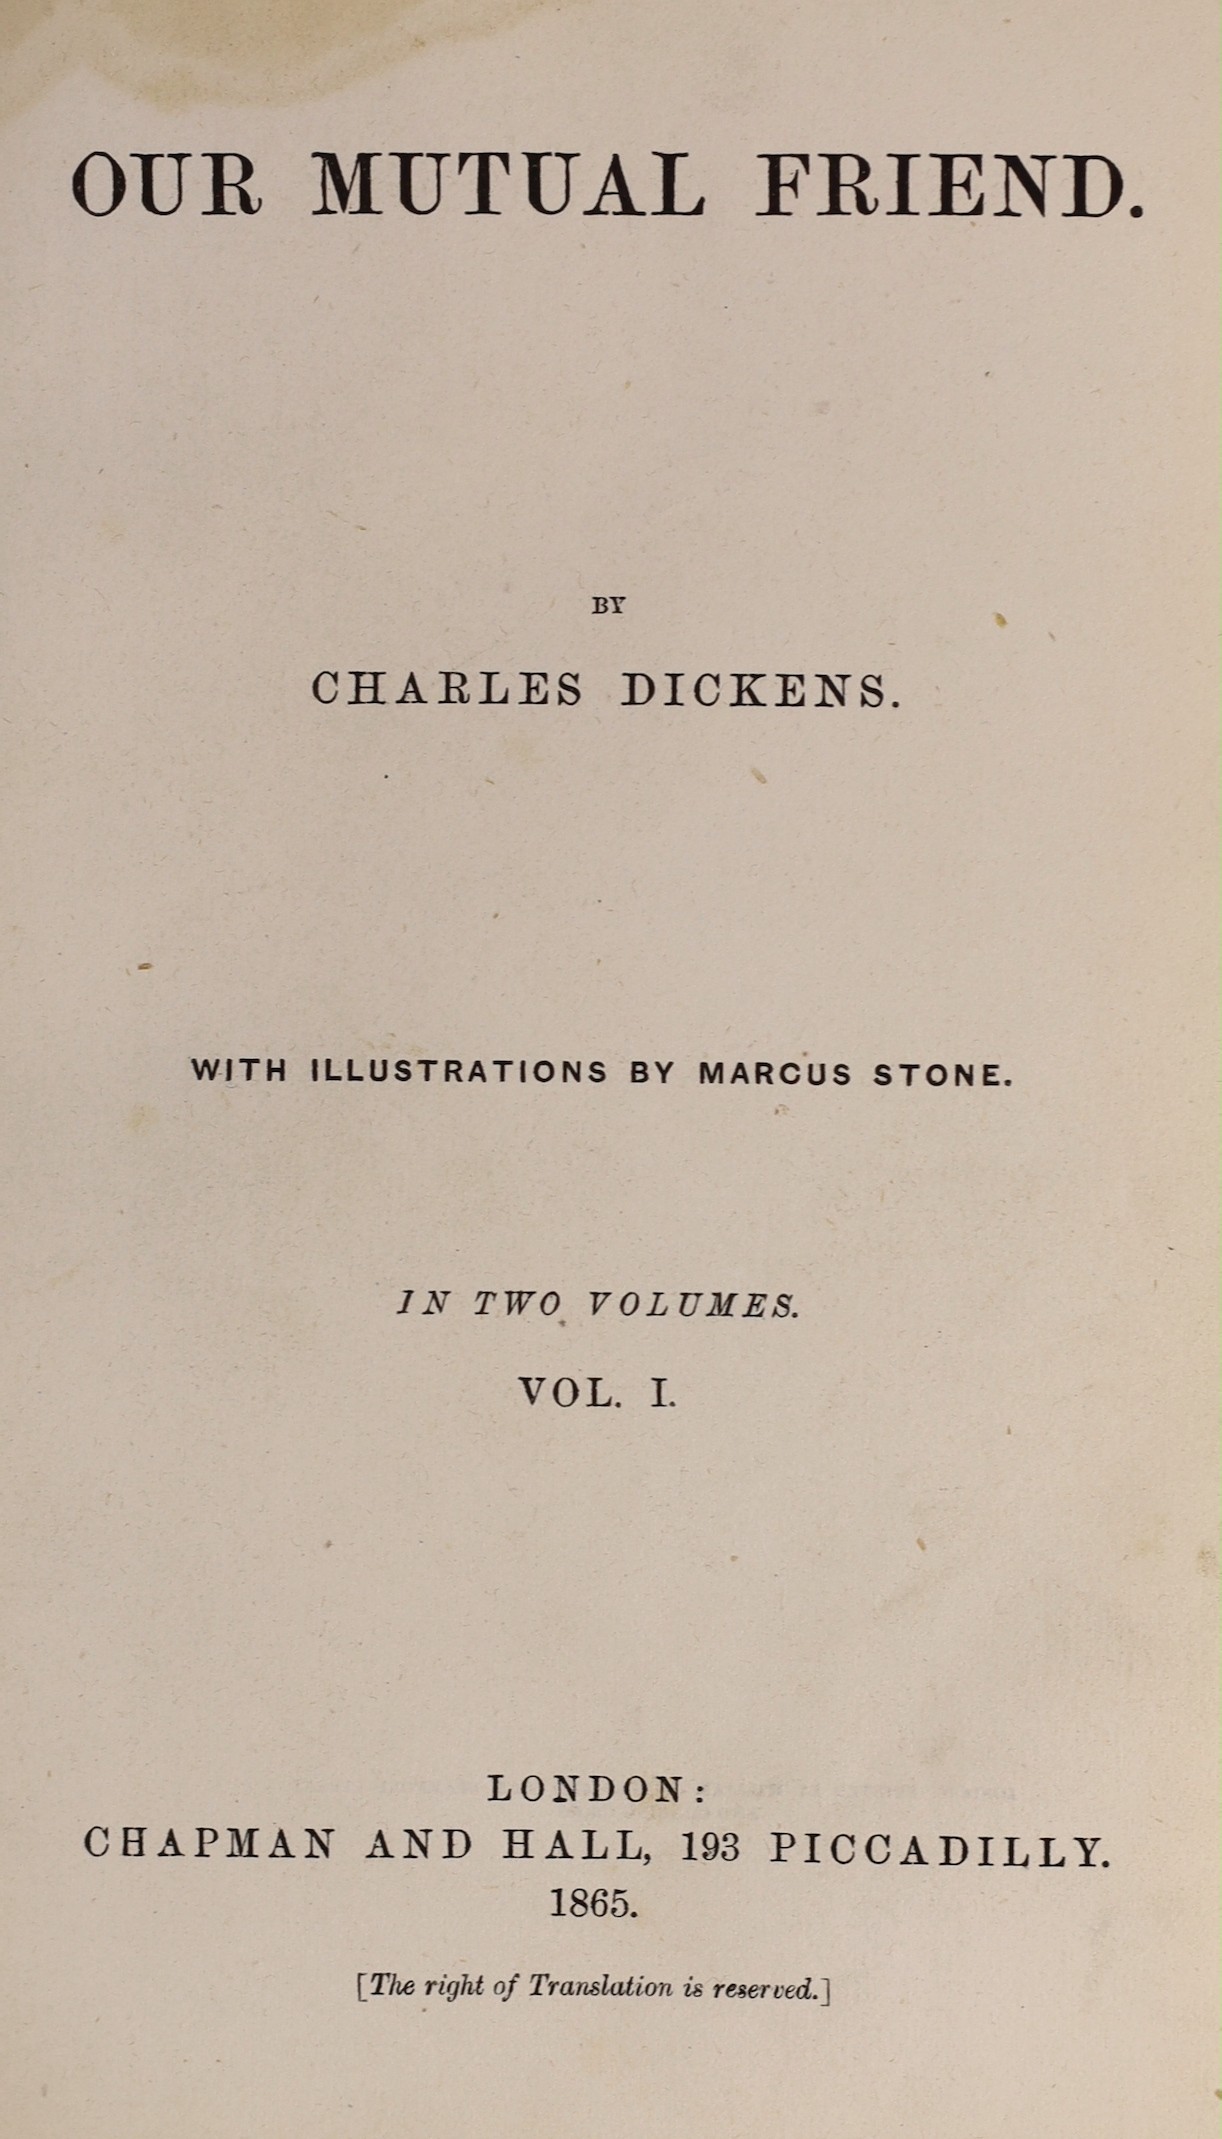 Dickens, Charles - Our Mutual Friend, 1st edition in book form, 2 vols, 8vo, quarter calf, cloth boards, illustrated with 40 plates by Marcus Stone, loss to upper section of vol.2 spine, tear to upper section Vol. 1 spin